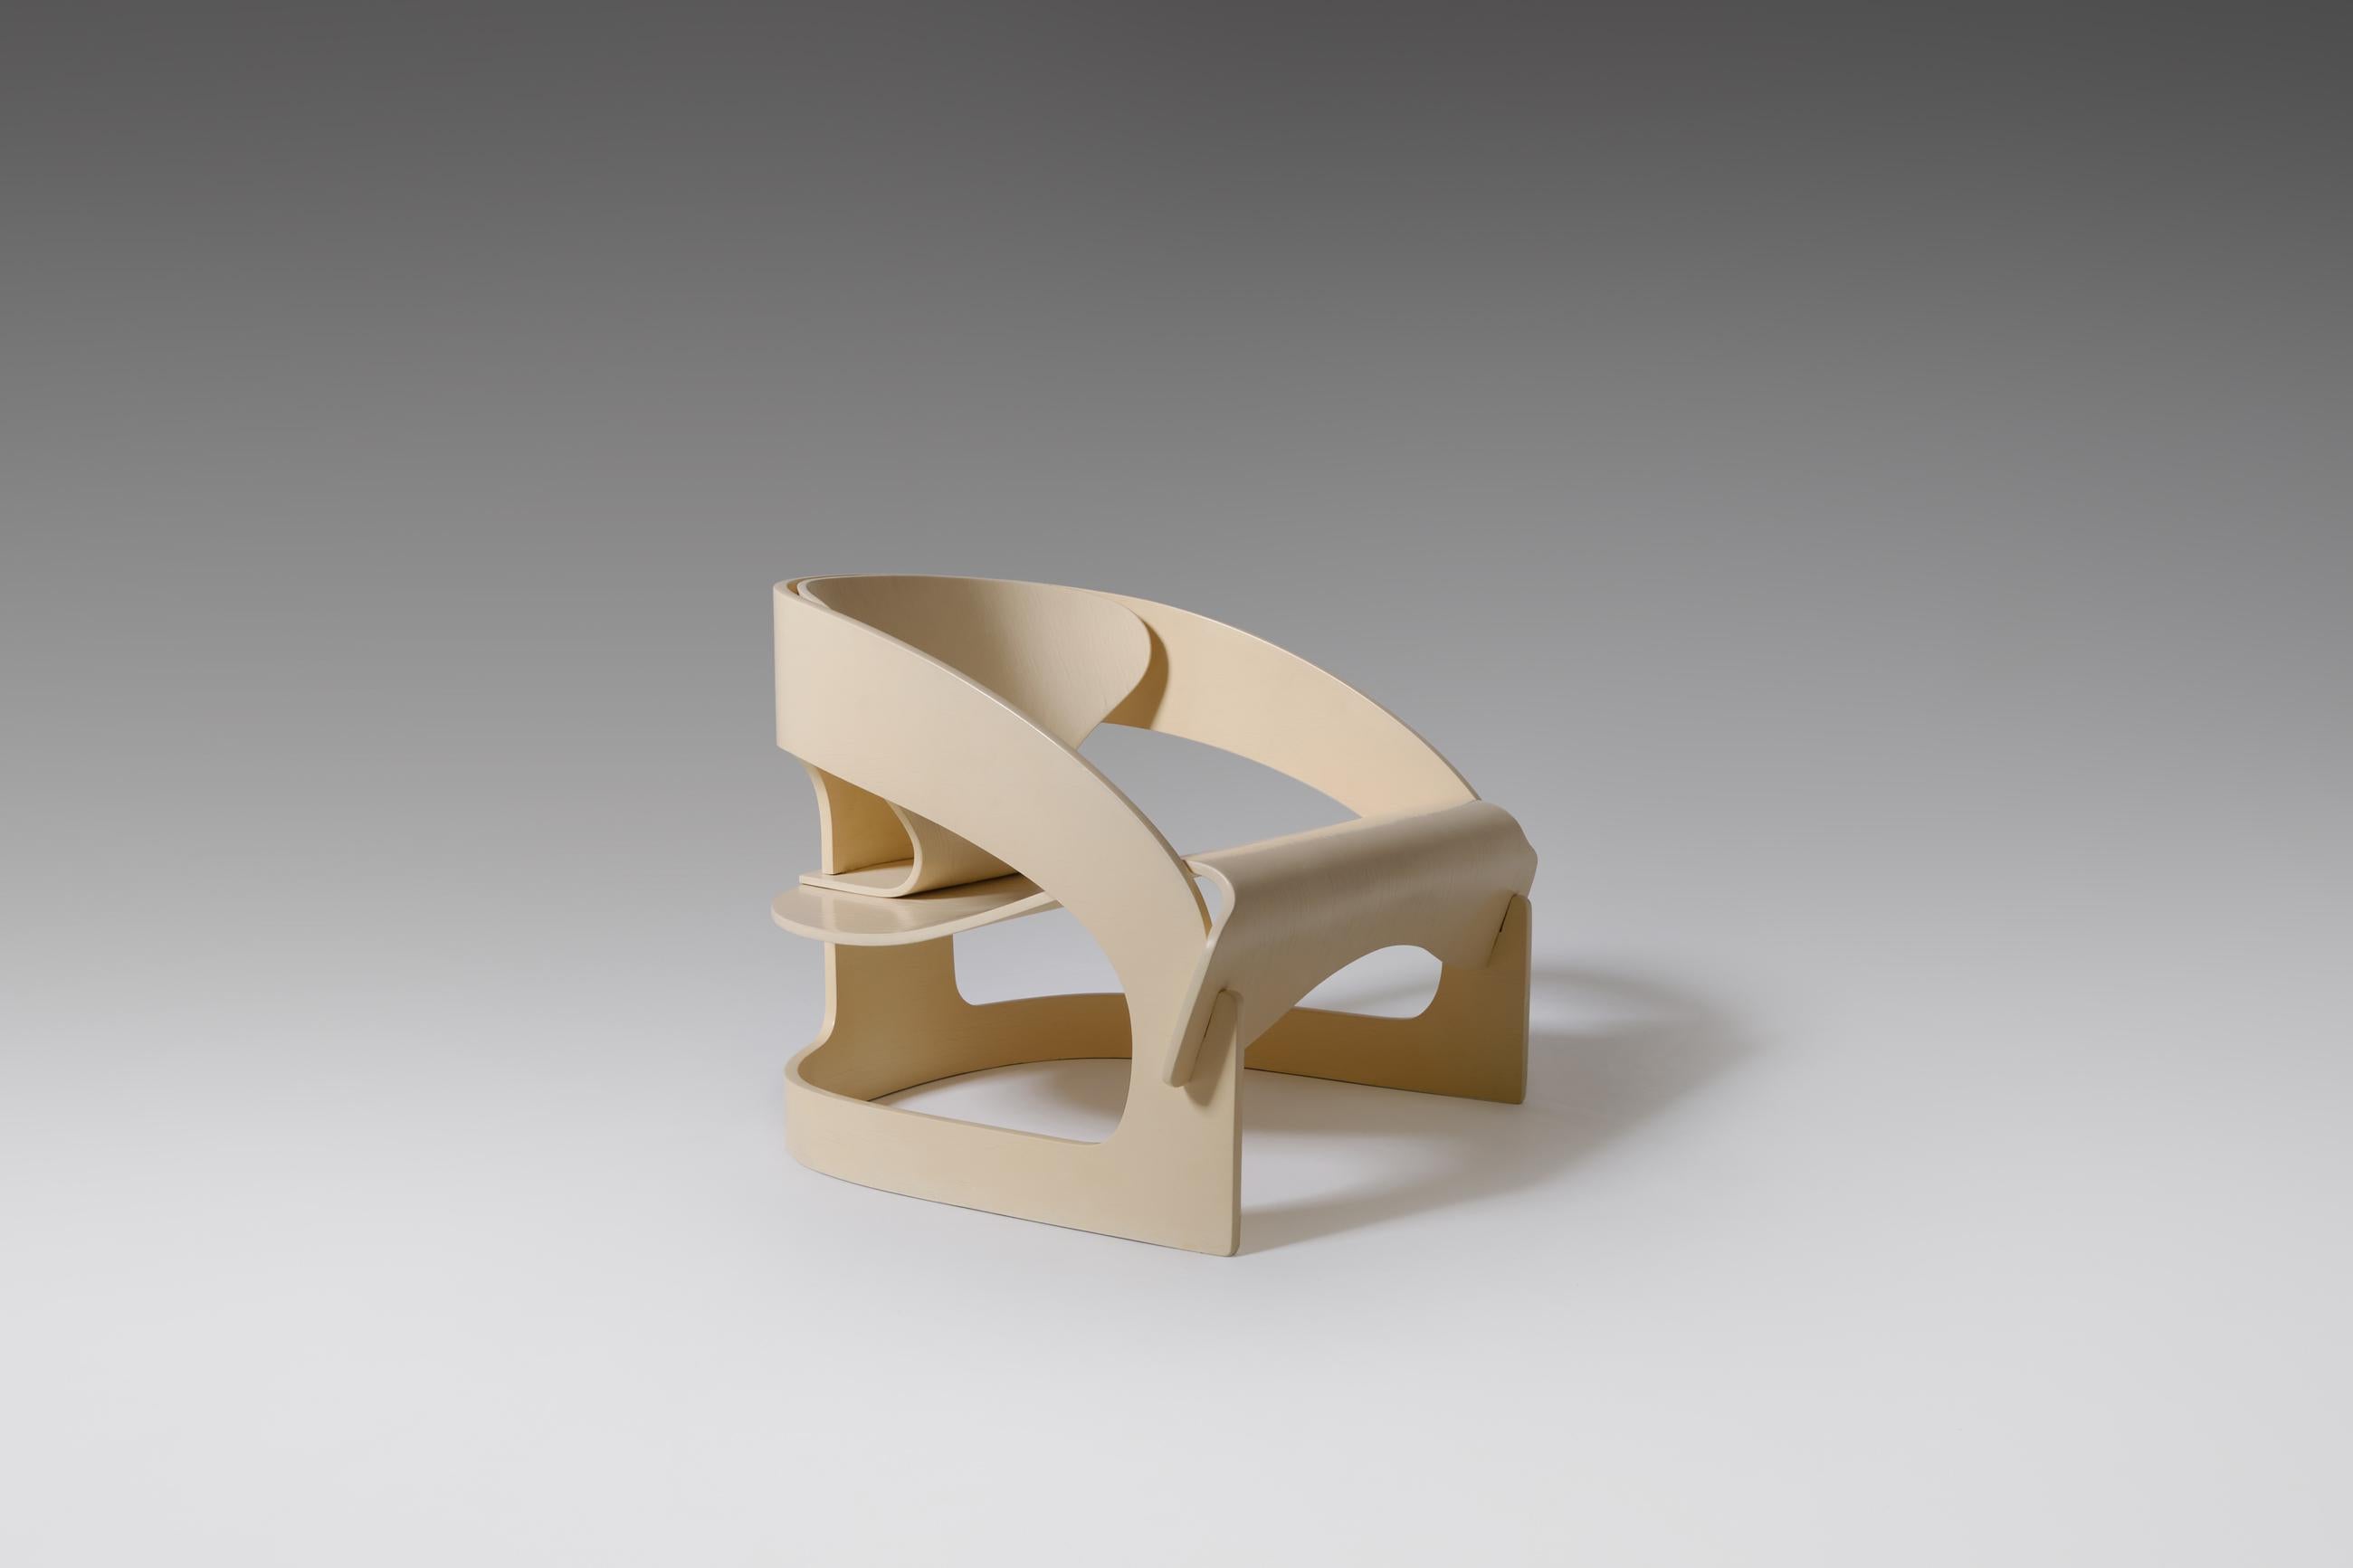 Rare early '4801' plywood armchair by Joe Colombo for Kartell, Italy, 1965. Stunning innovative design composed of three interlocking curved plywood elements; like a folded sculpture. The idea of Colombo was to design a lounge chair that could